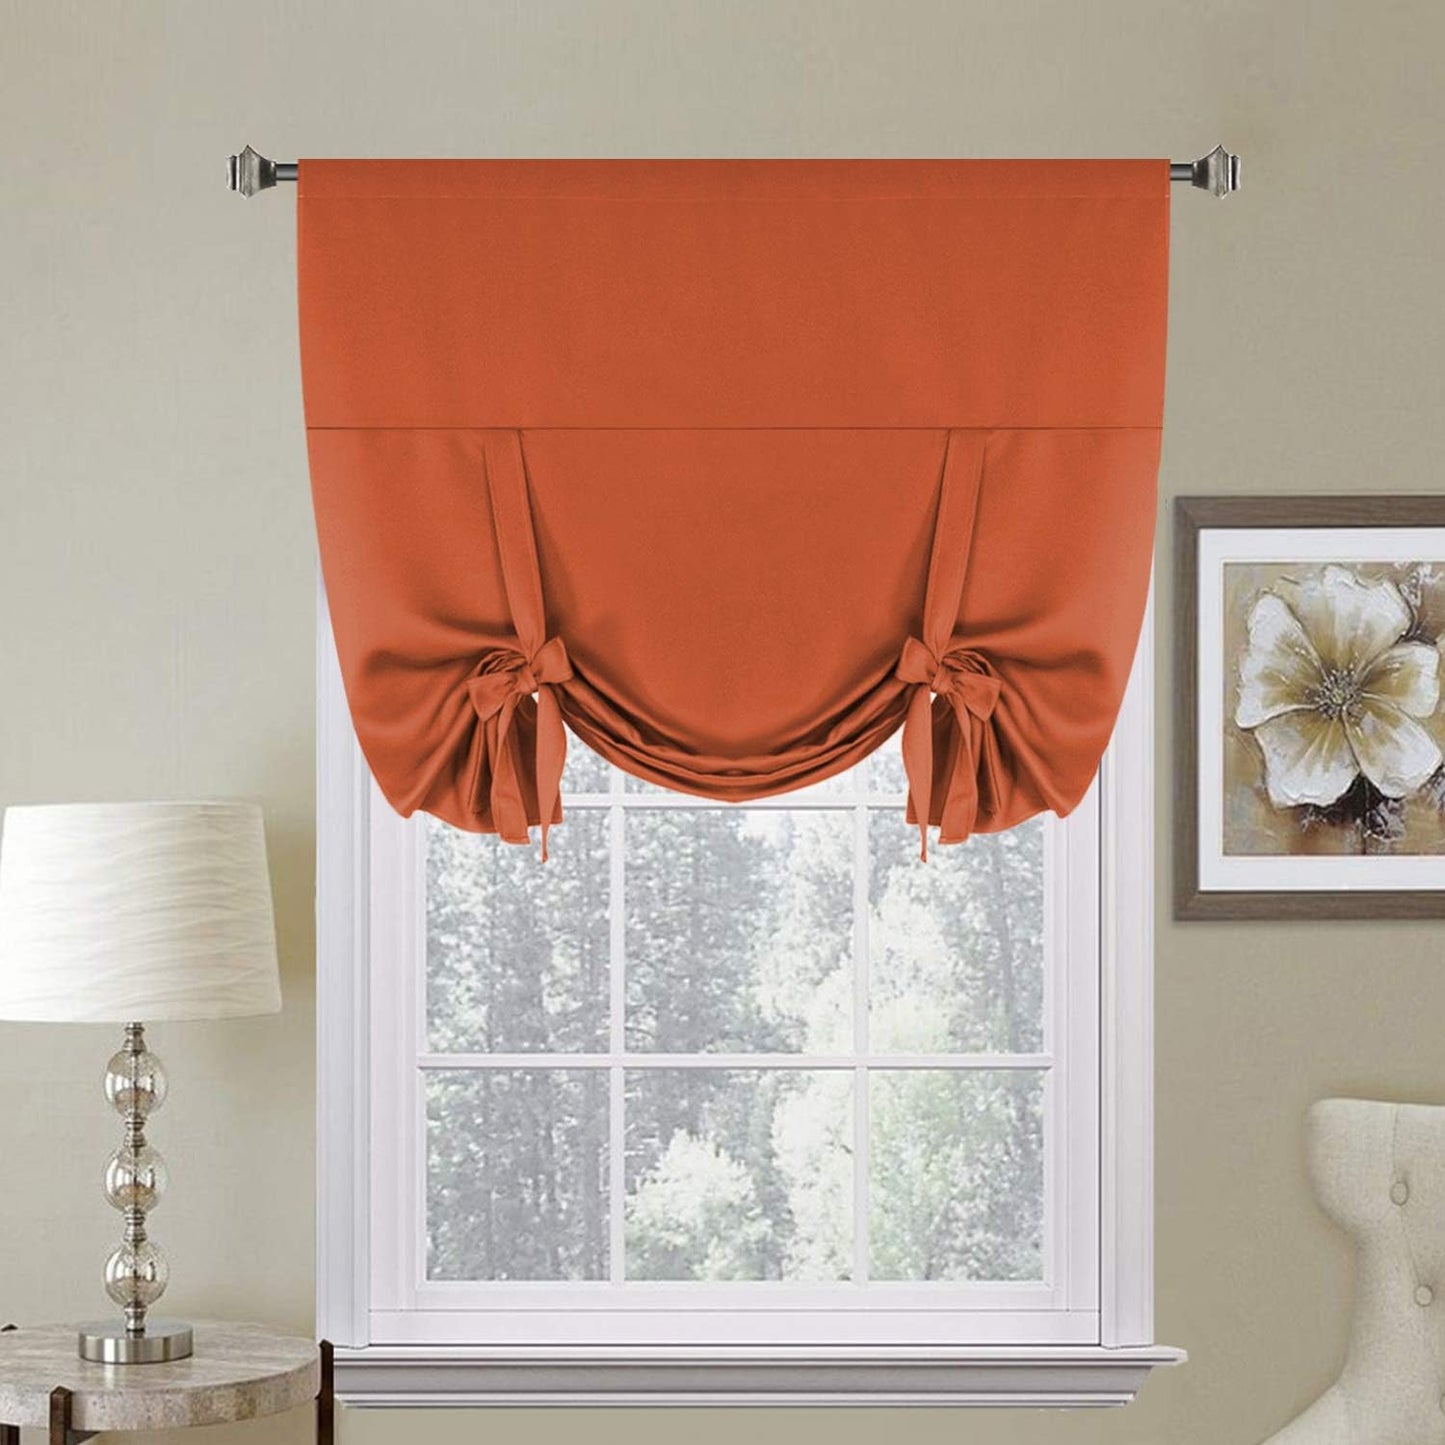 H.VERSAILTEX Tie up Curtain Thermal Insulated Room Darkening Rod Pocket Valance for Bedroom (Coral, 1 Panel, 42 Inches W X 63 Inches L)  H.VERSAILTEX Orange W42" X L63" 1-Pack 